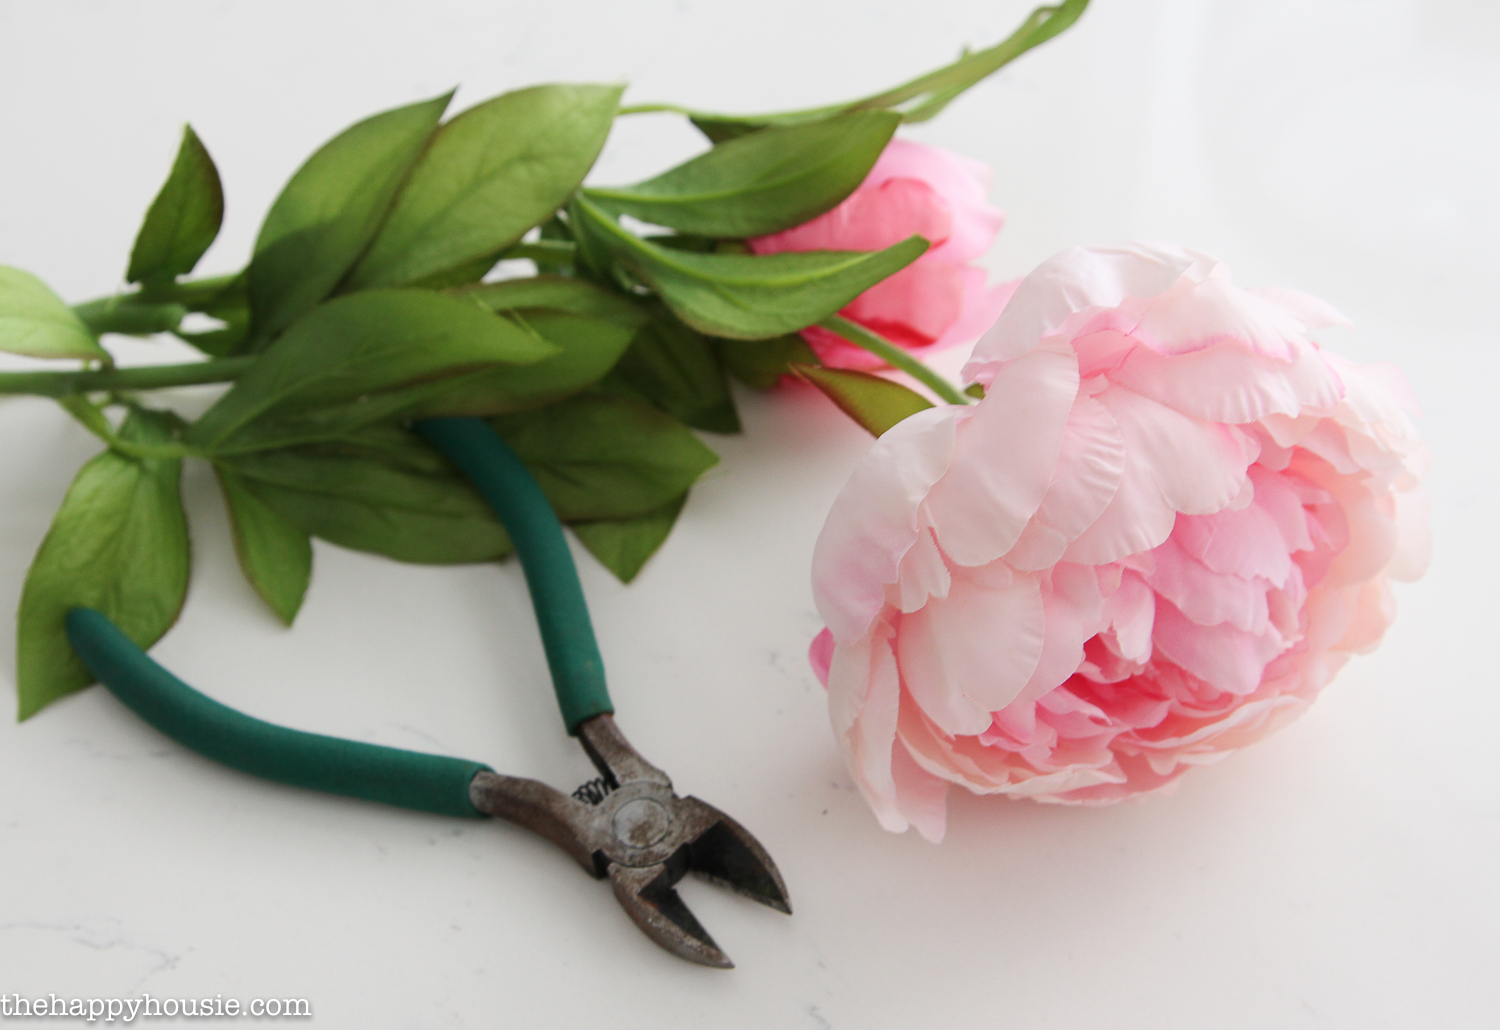 Cutting down these pink peonies.